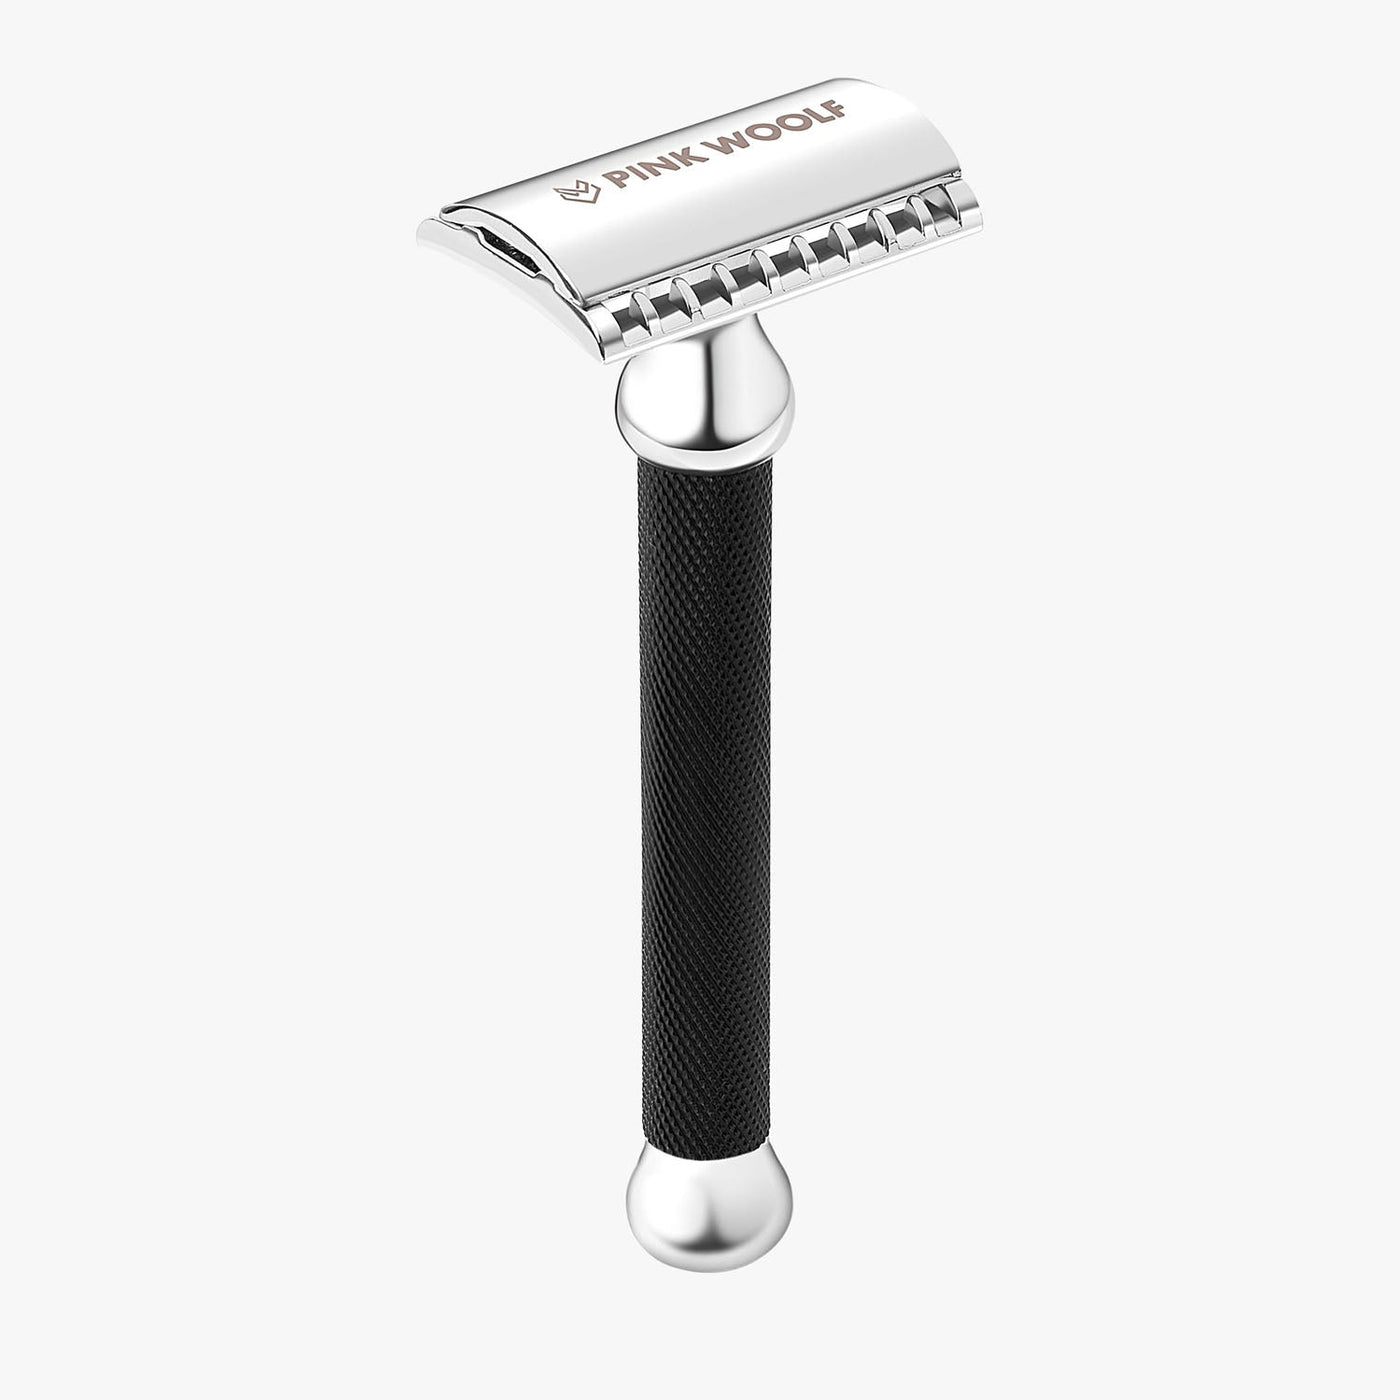 Get a Smooth Shave with a Modern Design Razor - PinkWoolf